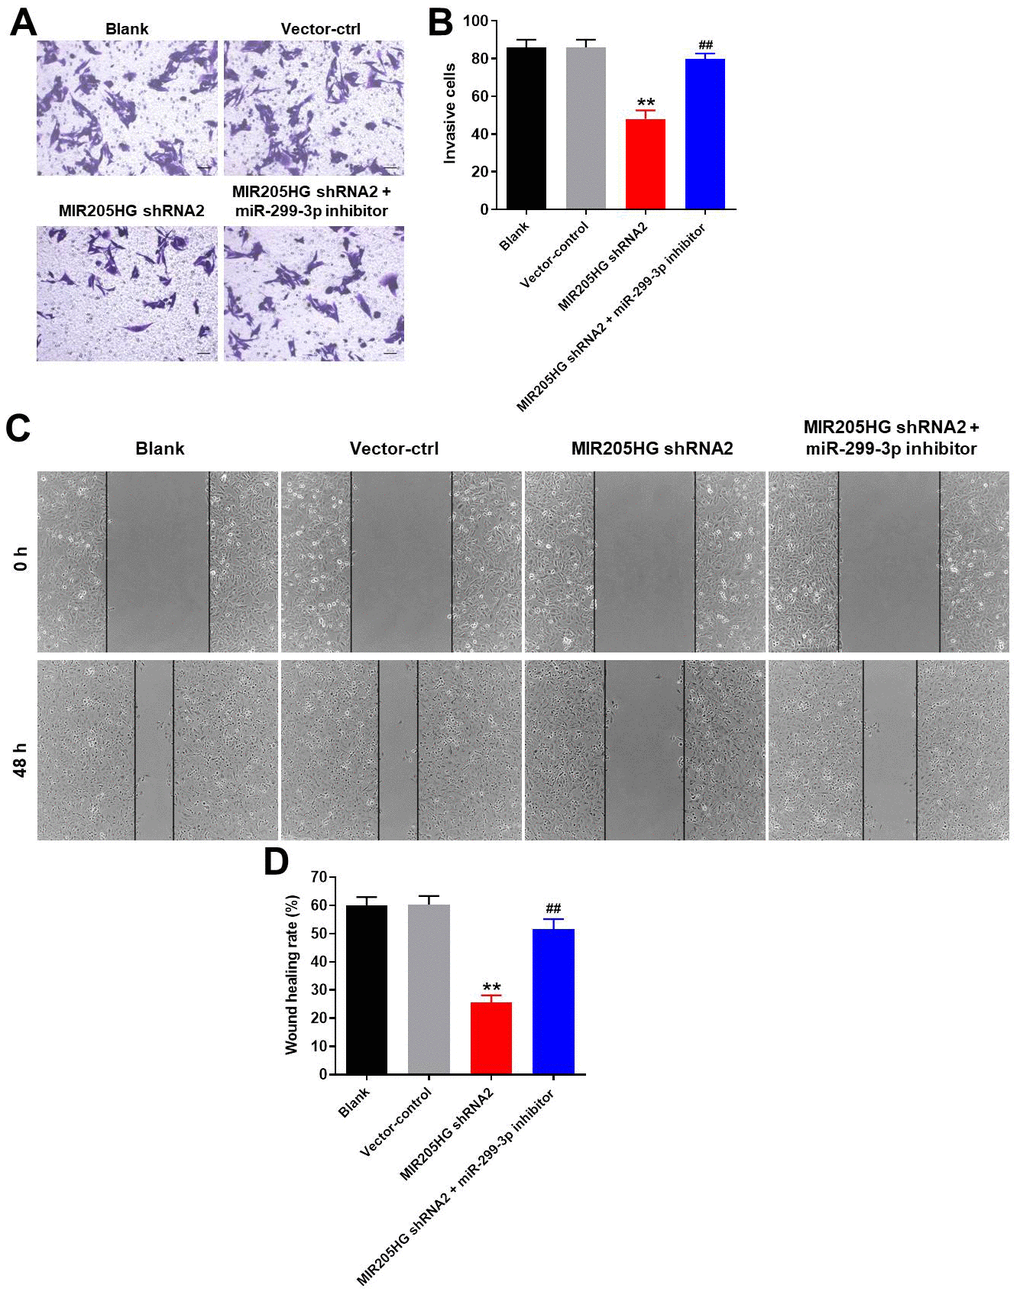 MIR205HG knockdown inhibits migration and invasion of melanoma cells. (A, B) Transwell assay results show the invasiveness of A375 cells transfected with MIR205HG shRNA2 or MIR205HG shRNA2 + miR-299-3p inhibitor. (C, D) Wound healing assay results show the migration ability of A375 cells transfected with MIR205HG shRNA2 or MIR205HG shRNA2 + miR-299-3p inhibitor. All experiments were performed thrice. **P##P